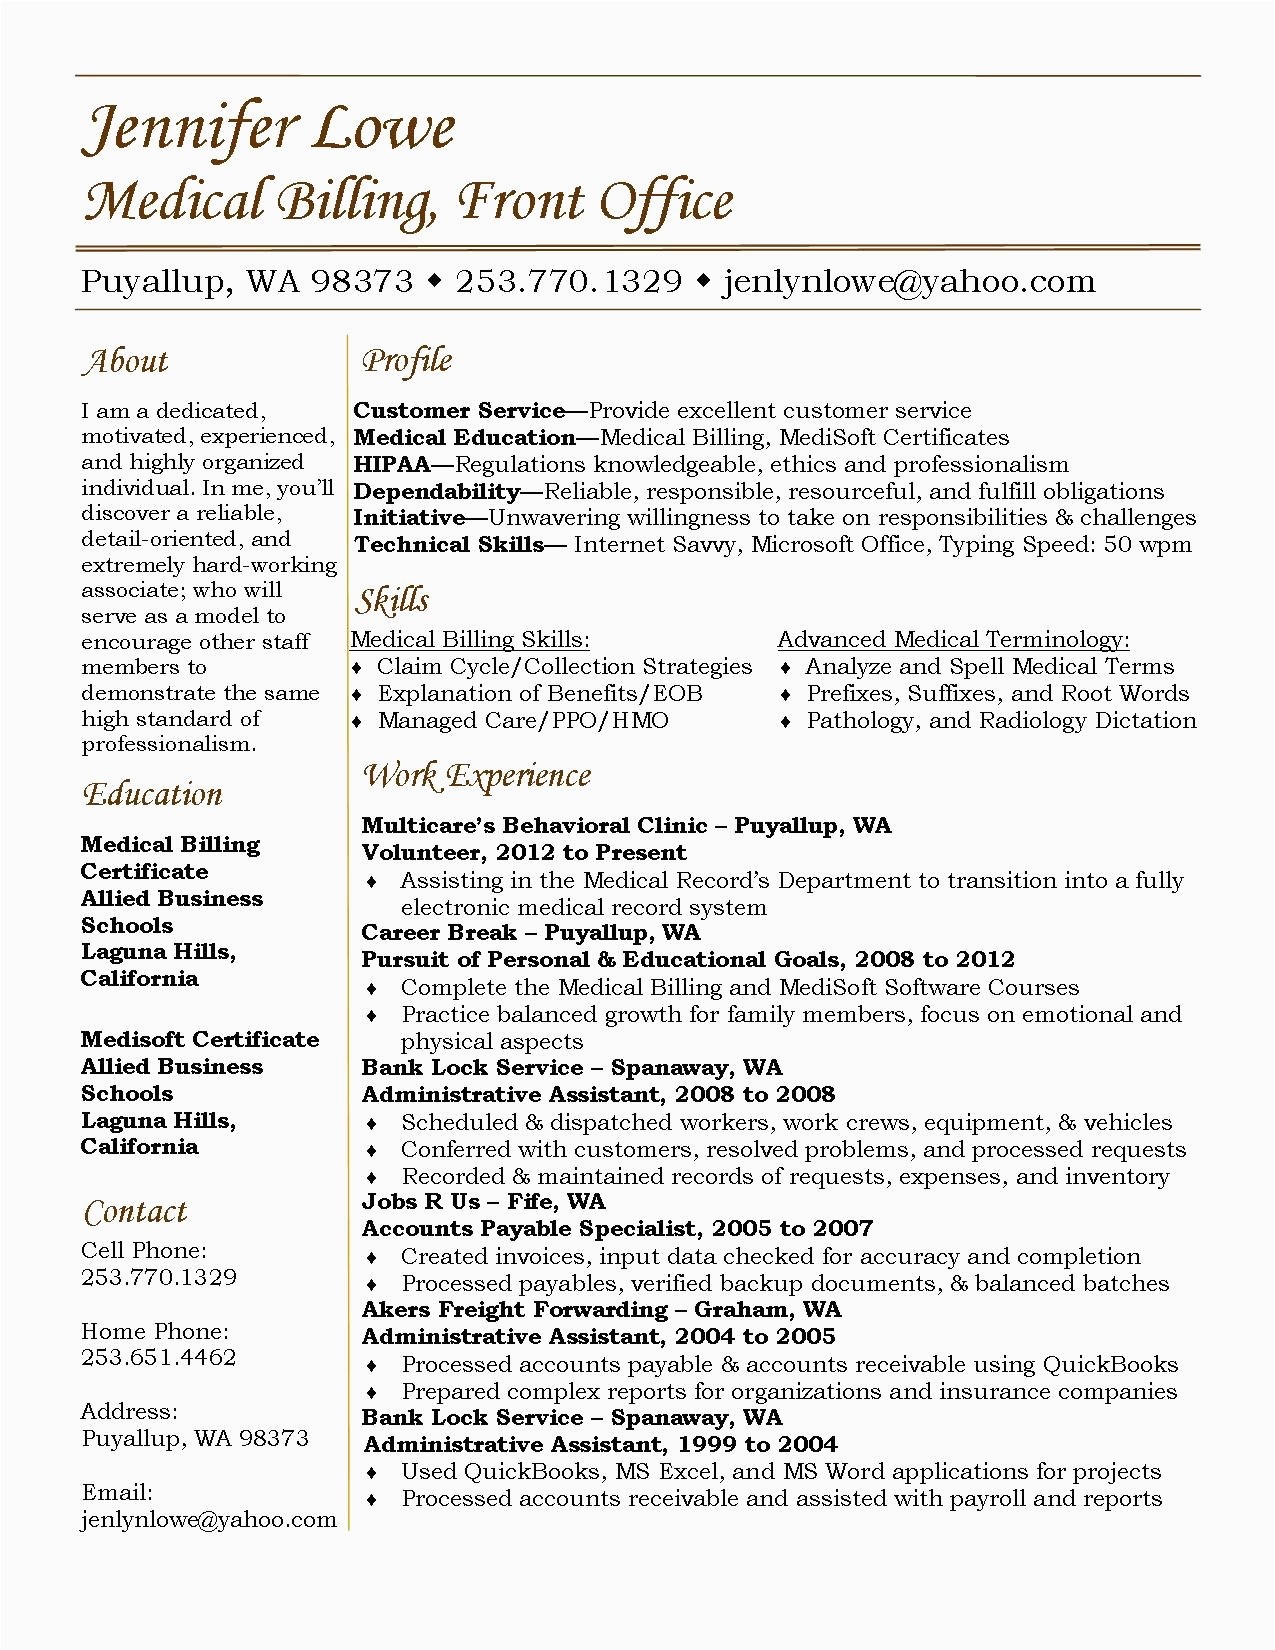 Medical Billing and Coding Specialist Resume Sample 17 Medical Billing and Coding Resume Sample Cprojects — Db